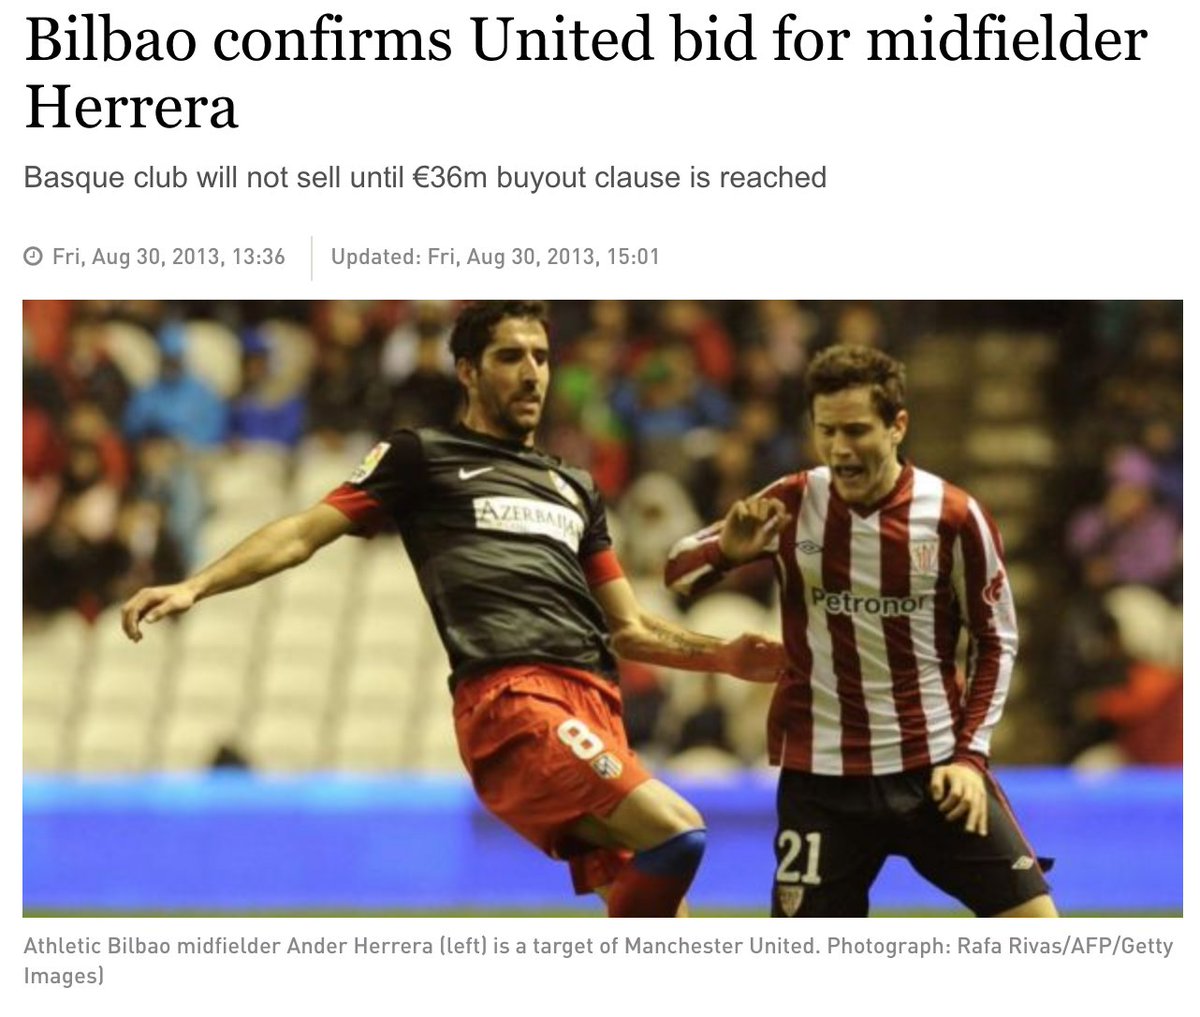 Herrera had a release clause of €36m and Bilbao made it clear from the beginning they wouldn’t accept anything less. United persisted in offering €30m though before time started to run out and United realised they had to meet the asking price, by which point it was too late.